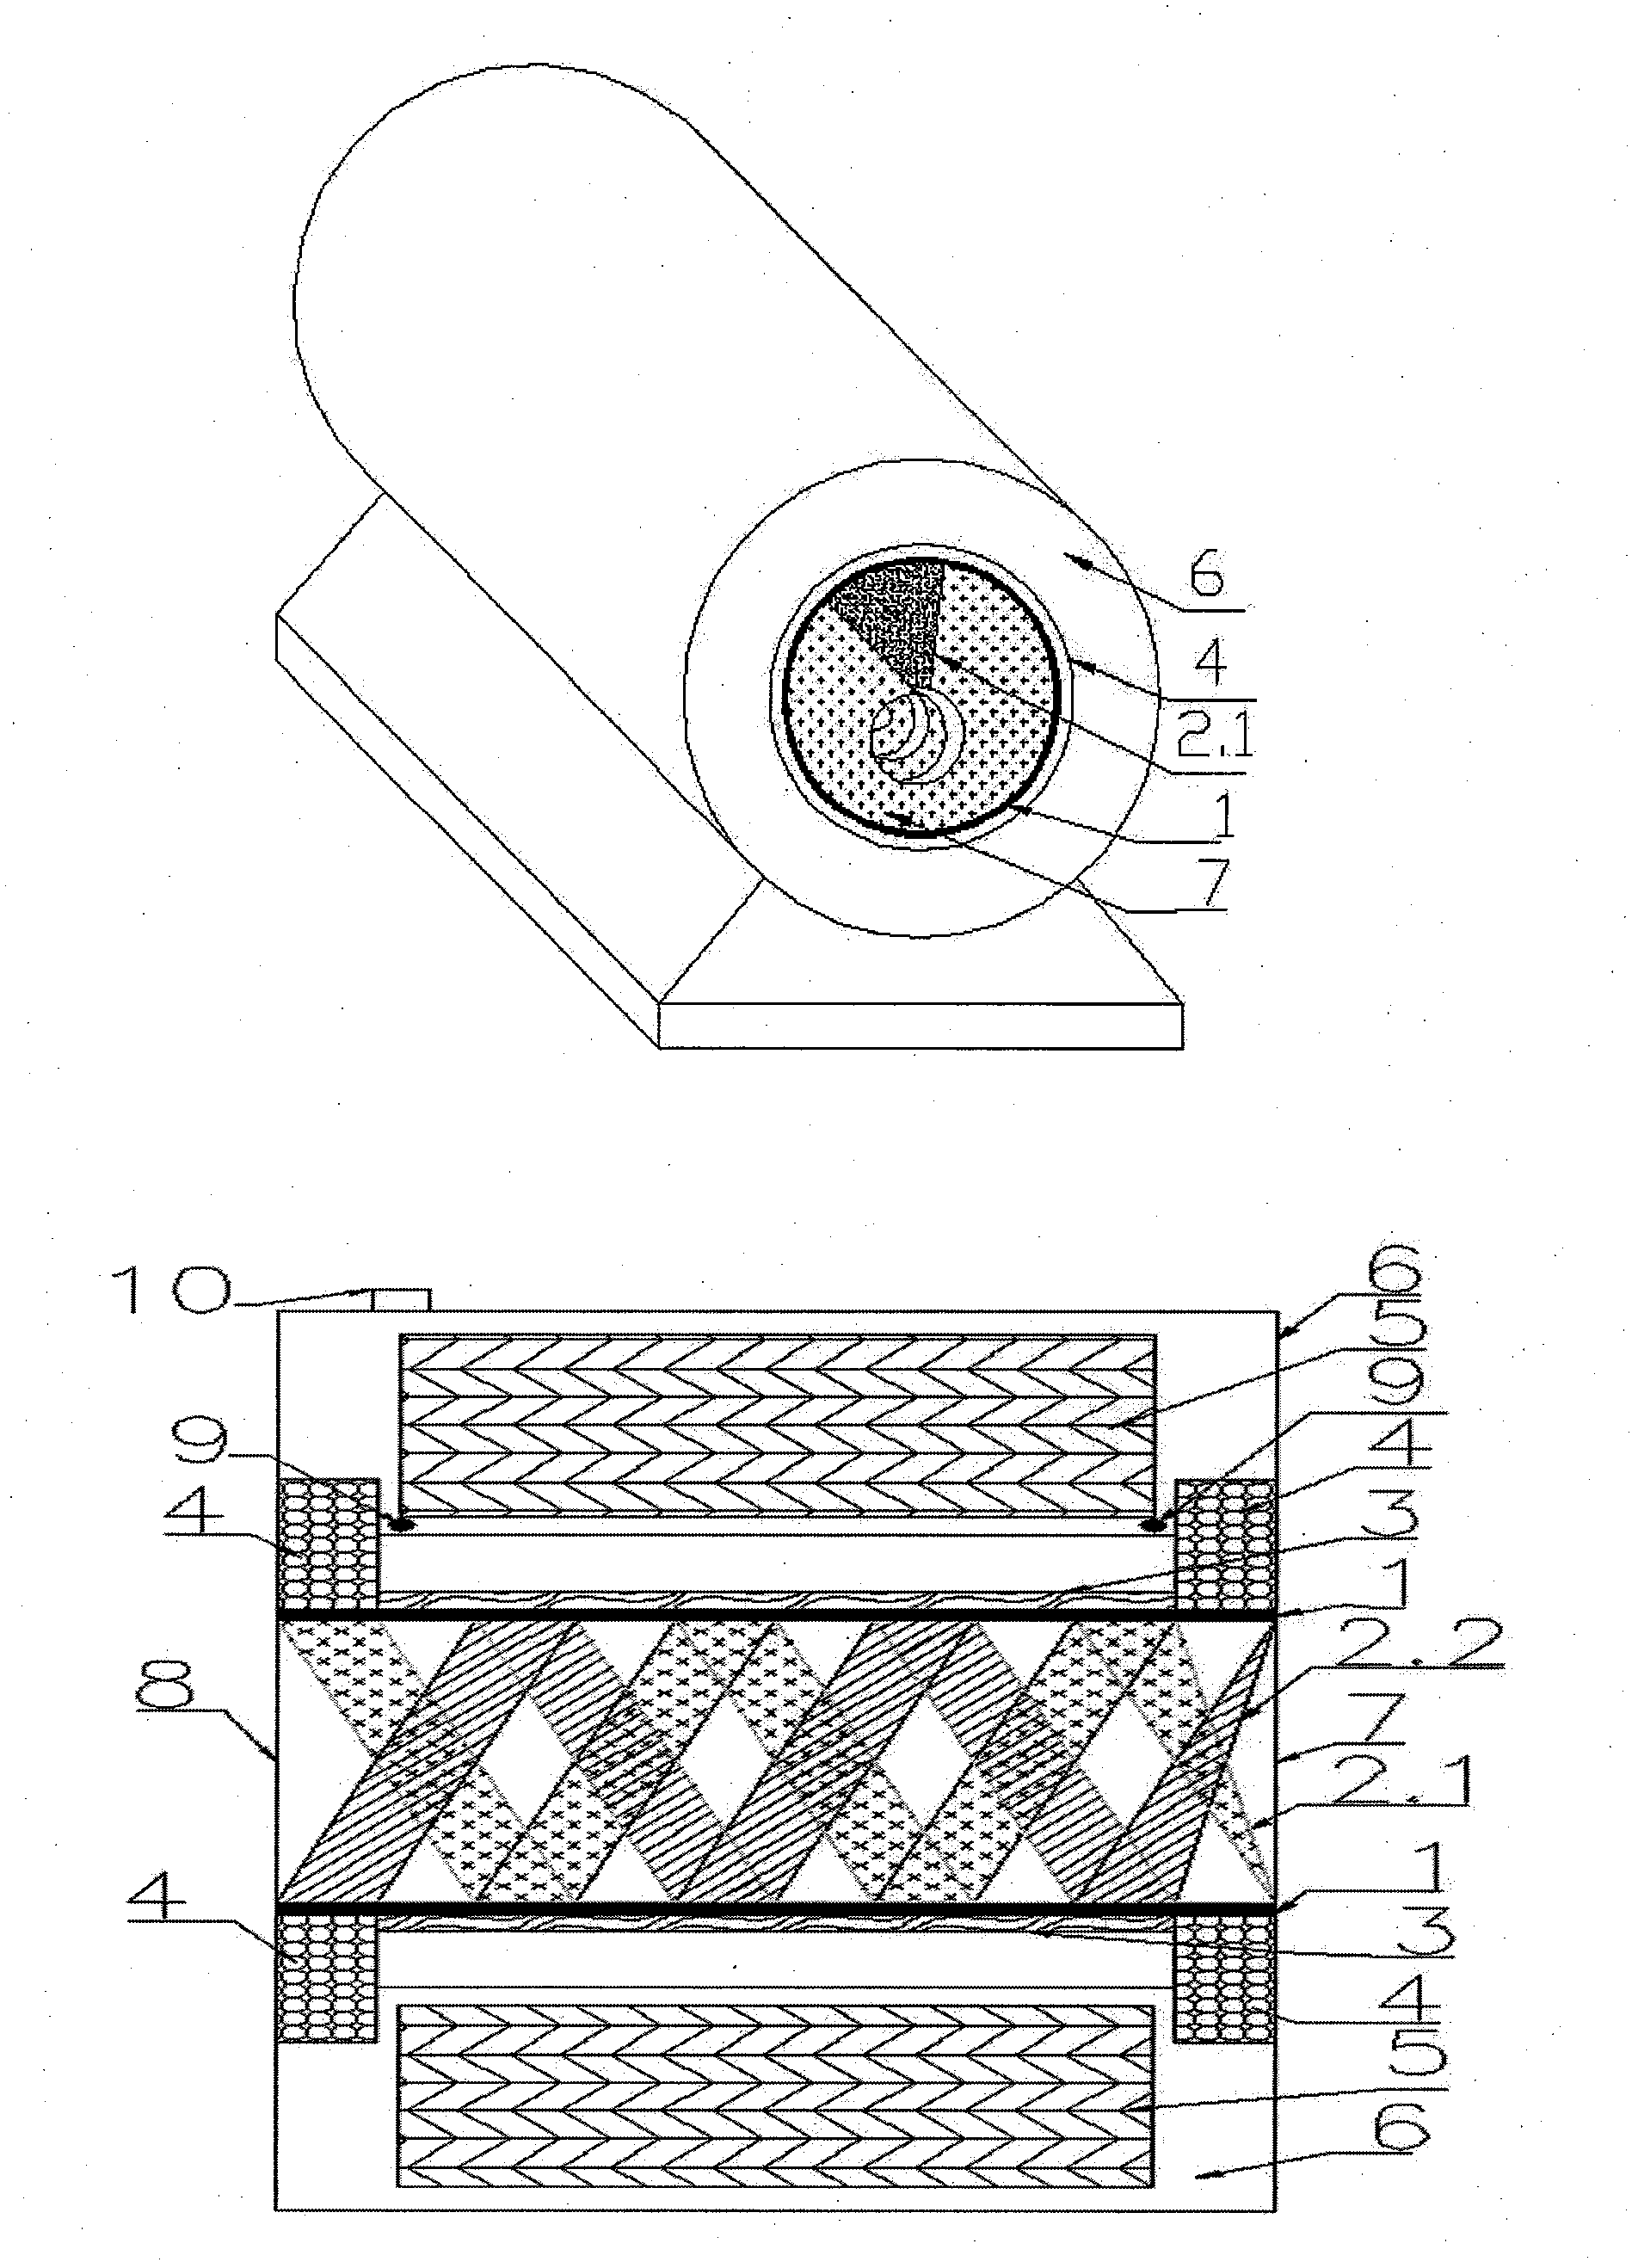 Inductive hollow spiral pushing device